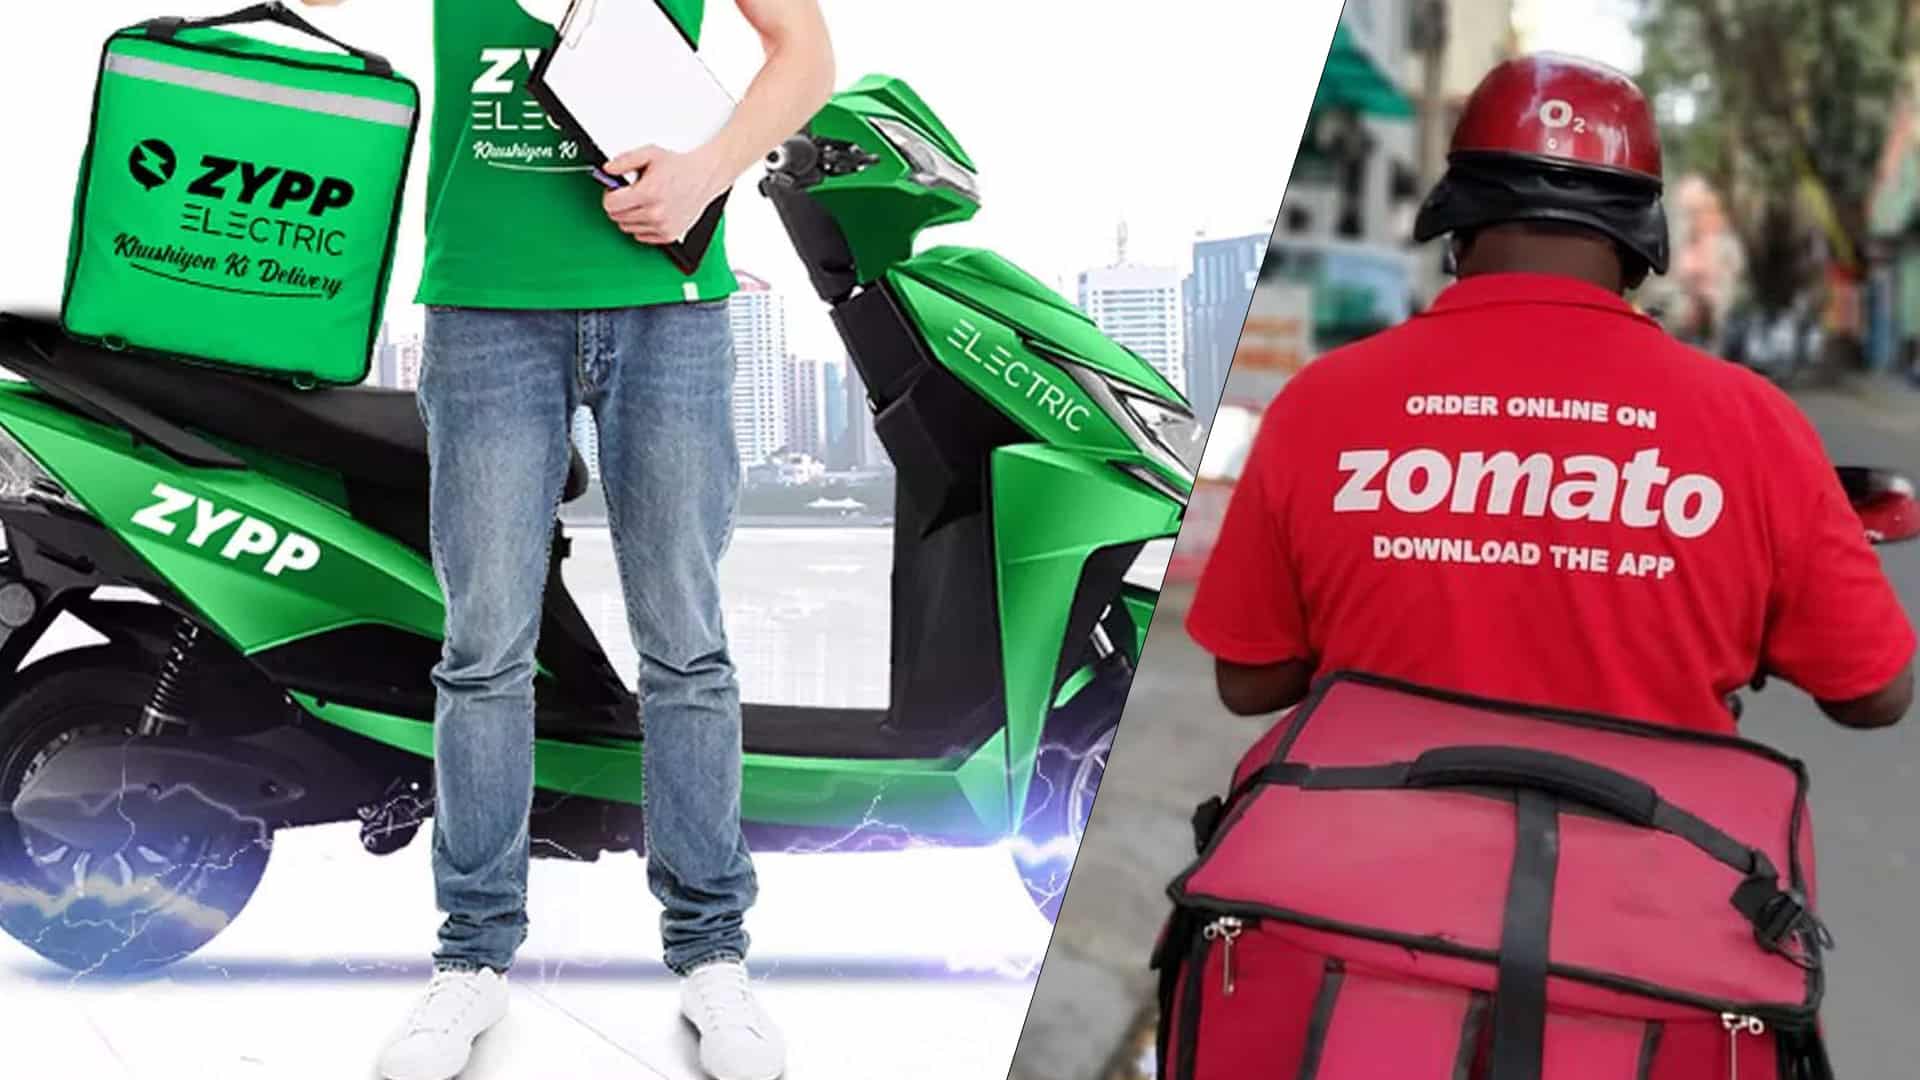 Zypp Electric, Zomato join hands to deploy 1-lakh e-scooters for last-mile delivery by 2024